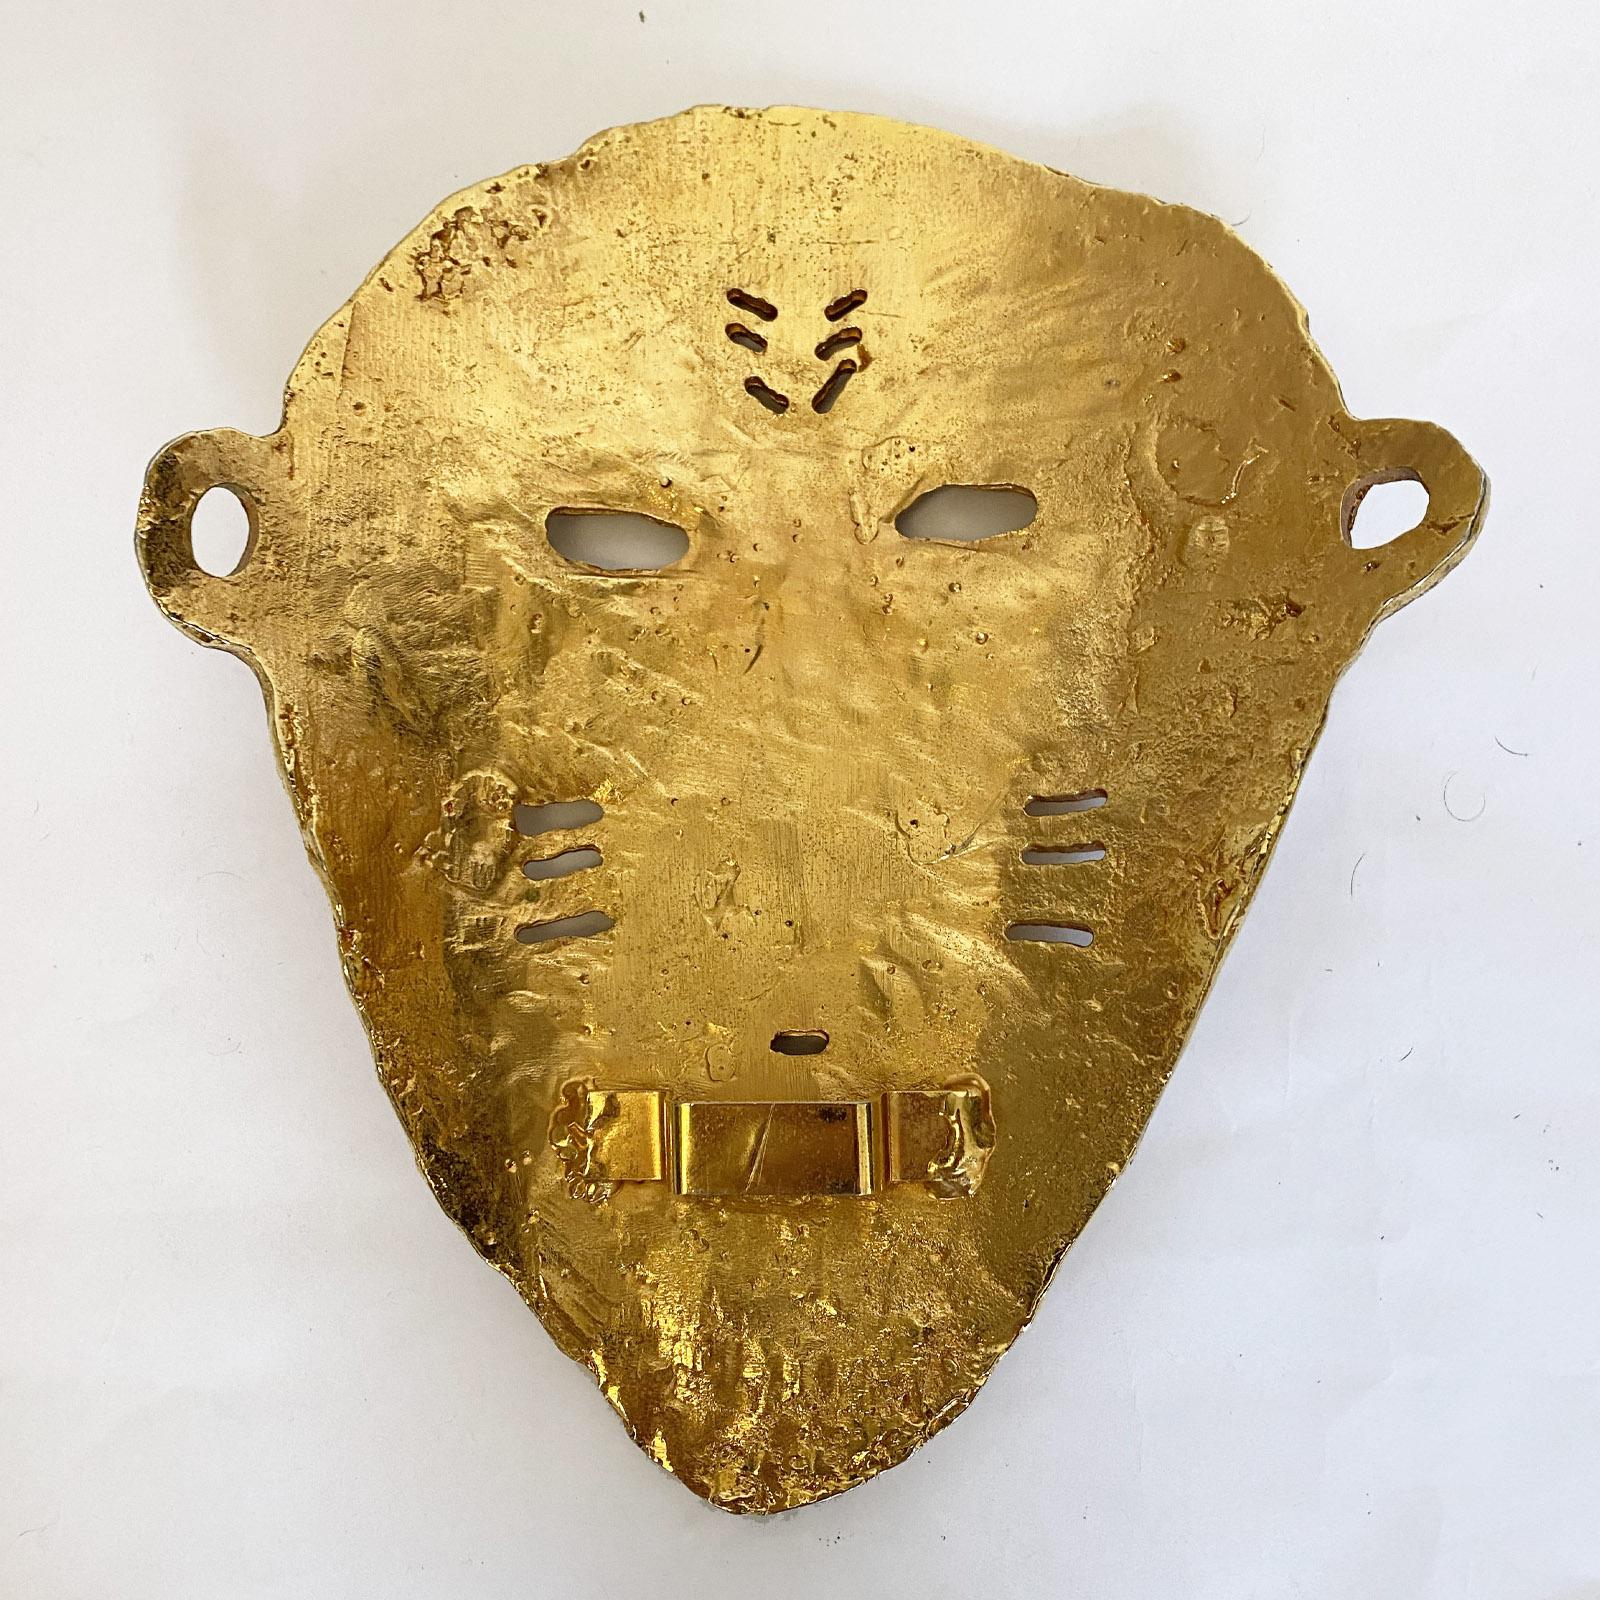 French Gilded Sculptural Mask by Linda Hattab for Fondica, France, 1990s.